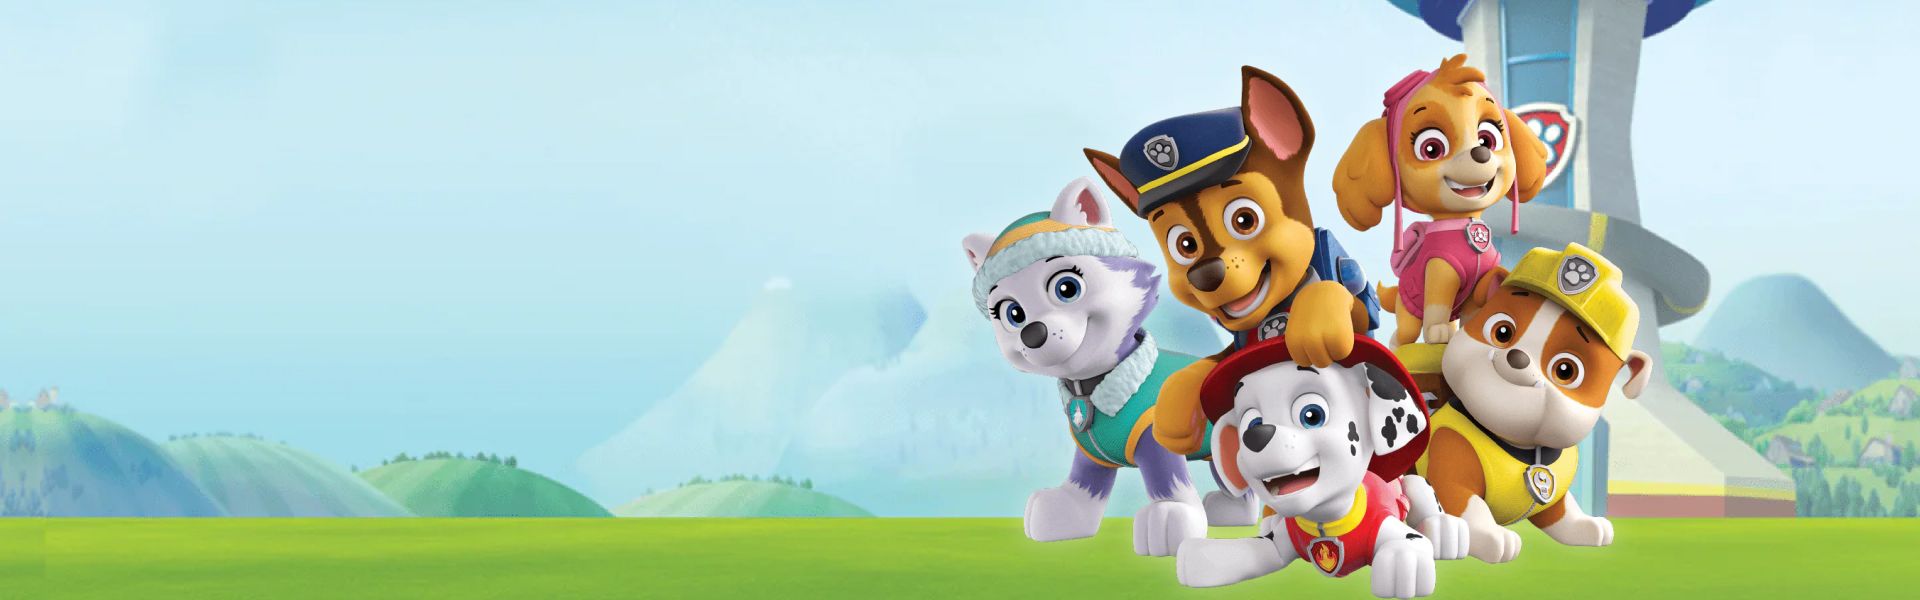 Text Reading "Shop Your Paw-Some Toys. Click on 'Shop the Latest' button to shop the latest Paw Patrol Toys" On the right side, there are 5 Paw Patrol movie characters.